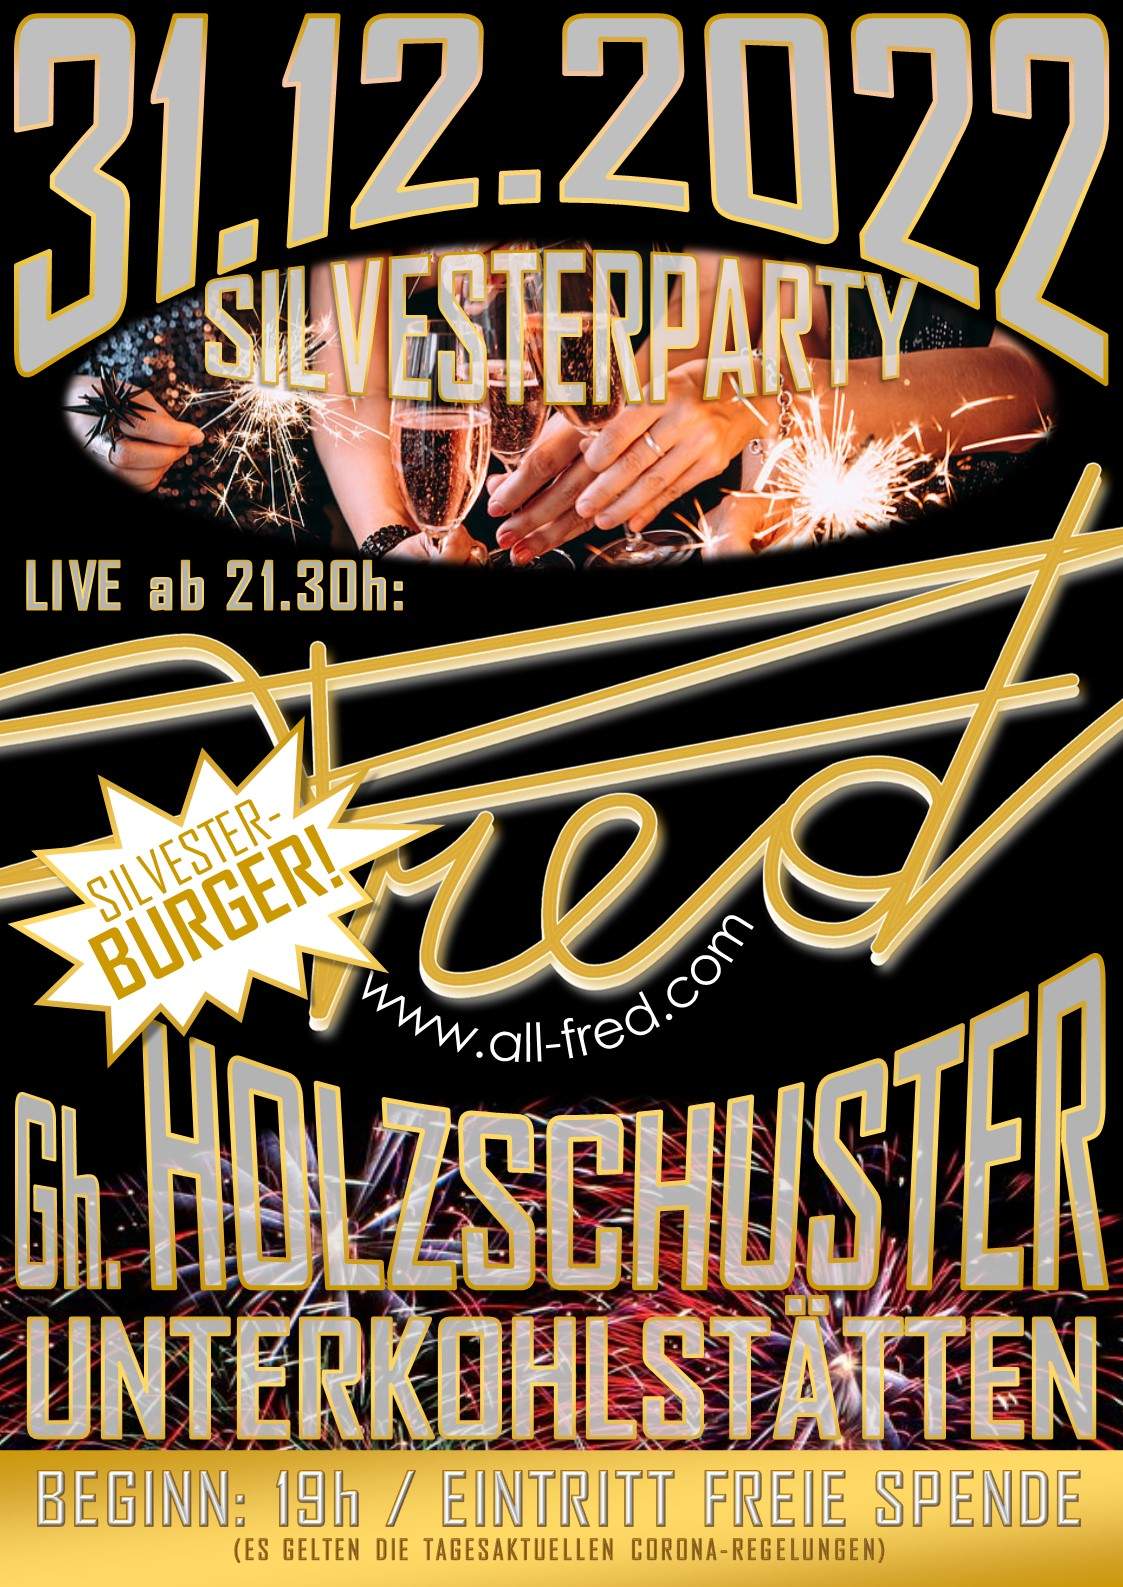 Silvesterparty Gh. Holzschuster mit FRED live!